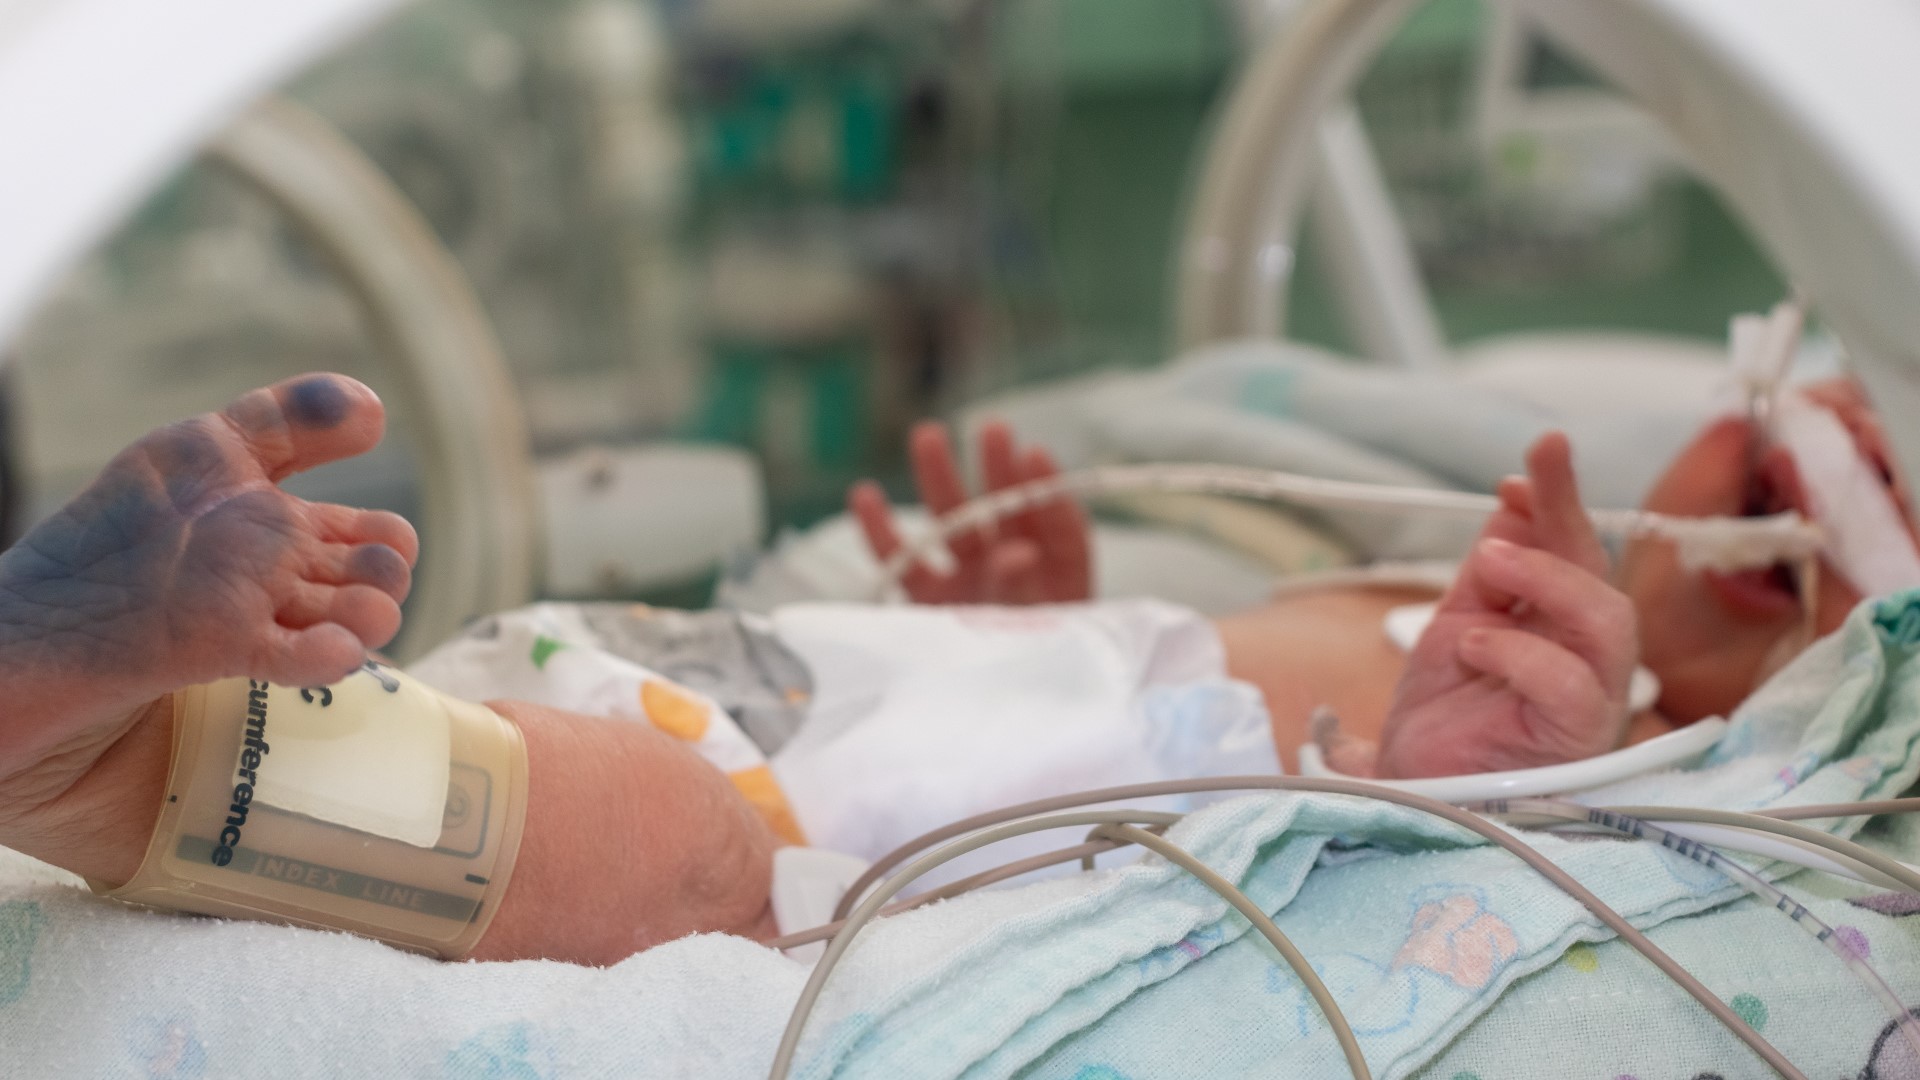 Nearly 380,000 babies are born prematurely in the U.S. each year.